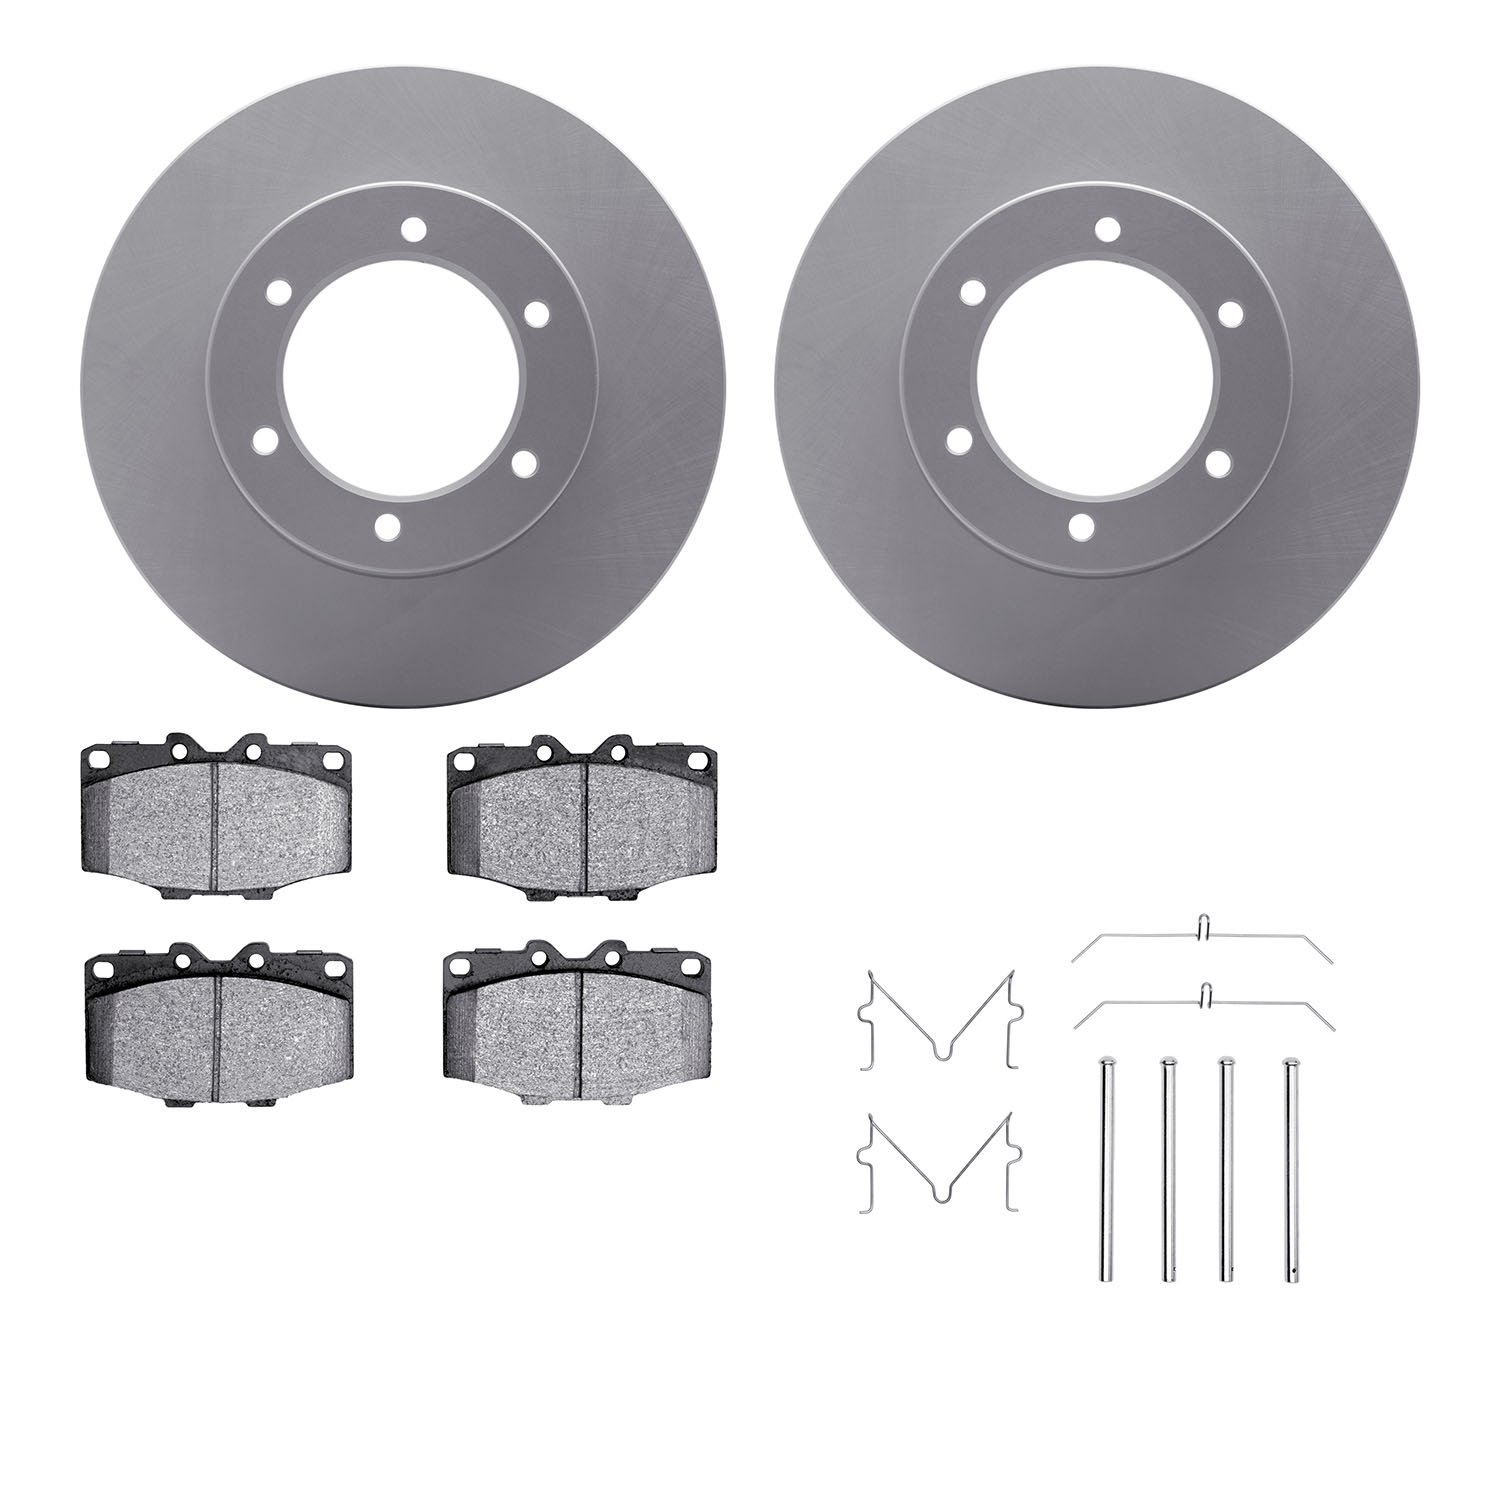 4412-76002 Geospec Brake Rotors with Ultimate-Duty Brake Pads & Hardware, 1986-1988 Lexus/Toyota/Scion, Position: Front